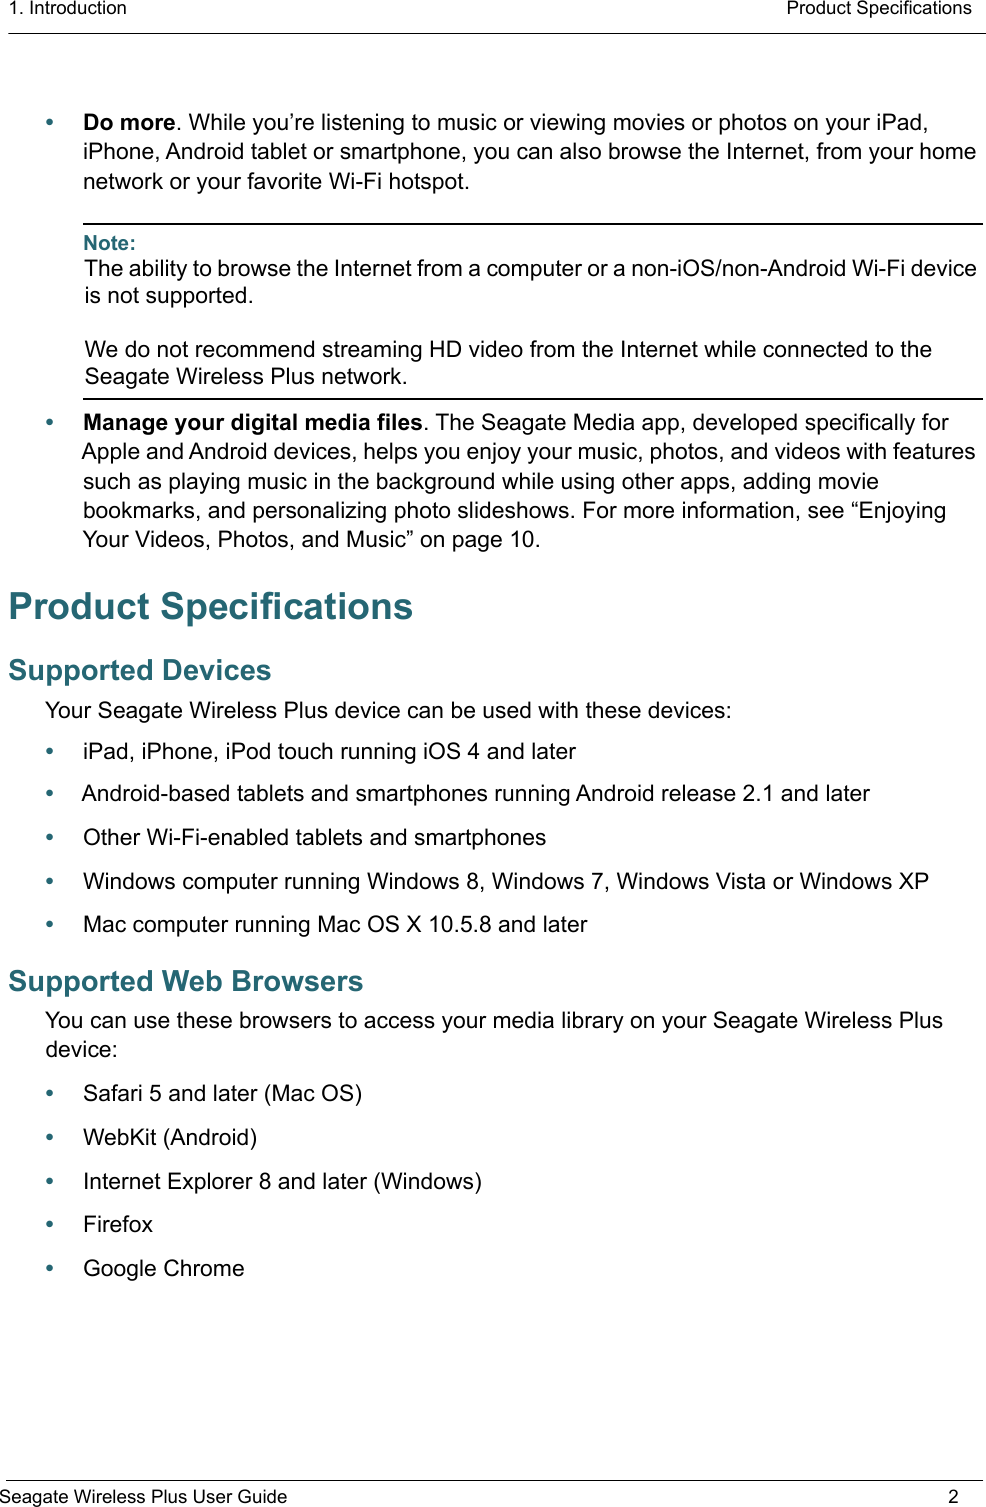 1. Introduction  Product SpecificationsSeagate Wireless Plus User Guide 2•Do more. While you’re listening to music or viewing movies or photos on your iPad, iPhone, Android tablet or smartphone, you can also browse the Internet, from your home network or your favorite Wi-Fi hotspot.Note: The ability to browse the Internet from a computer or a non-iOS/non-Android Wi-Fi device is not supported.We do not recommend streaming HD video from the Internet while connected to the Seagate Wireless Plus network.•Manage your digital media files. The Seagate Media app, developed specifically for Apple and Android devices, helps you enjoy your music, photos, and videos with features such as playing music in the background while using other apps, adding movie bookmarks, and personalizing photo slideshows. For more information, see “Enjoying Your Videos, Photos, and Music” on page 10.Product SpecificationsSupported DevicesYour Seagate Wireless Plus device can be used with these devices:•iPad, iPhone, iPod touch running iOS 4 and later•Android-based tablets and smartphones running Android release 2.1 and later•Other Wi-Fi-enabled tablets and smartphones•Windows computer running Windows 8, Windows 7, Windows Vista or Windows XP•Mac computer running Mac OS X 10.5.8 and laterSupported Web BrowsersYou can use these browsers to access your media library on your Seagate Wireless Plus device: •Safari 5 and later (Mac OS)•WebKit (Android)•Internet Explorer 8 and later (Windows)•Firefox•Google Chrome